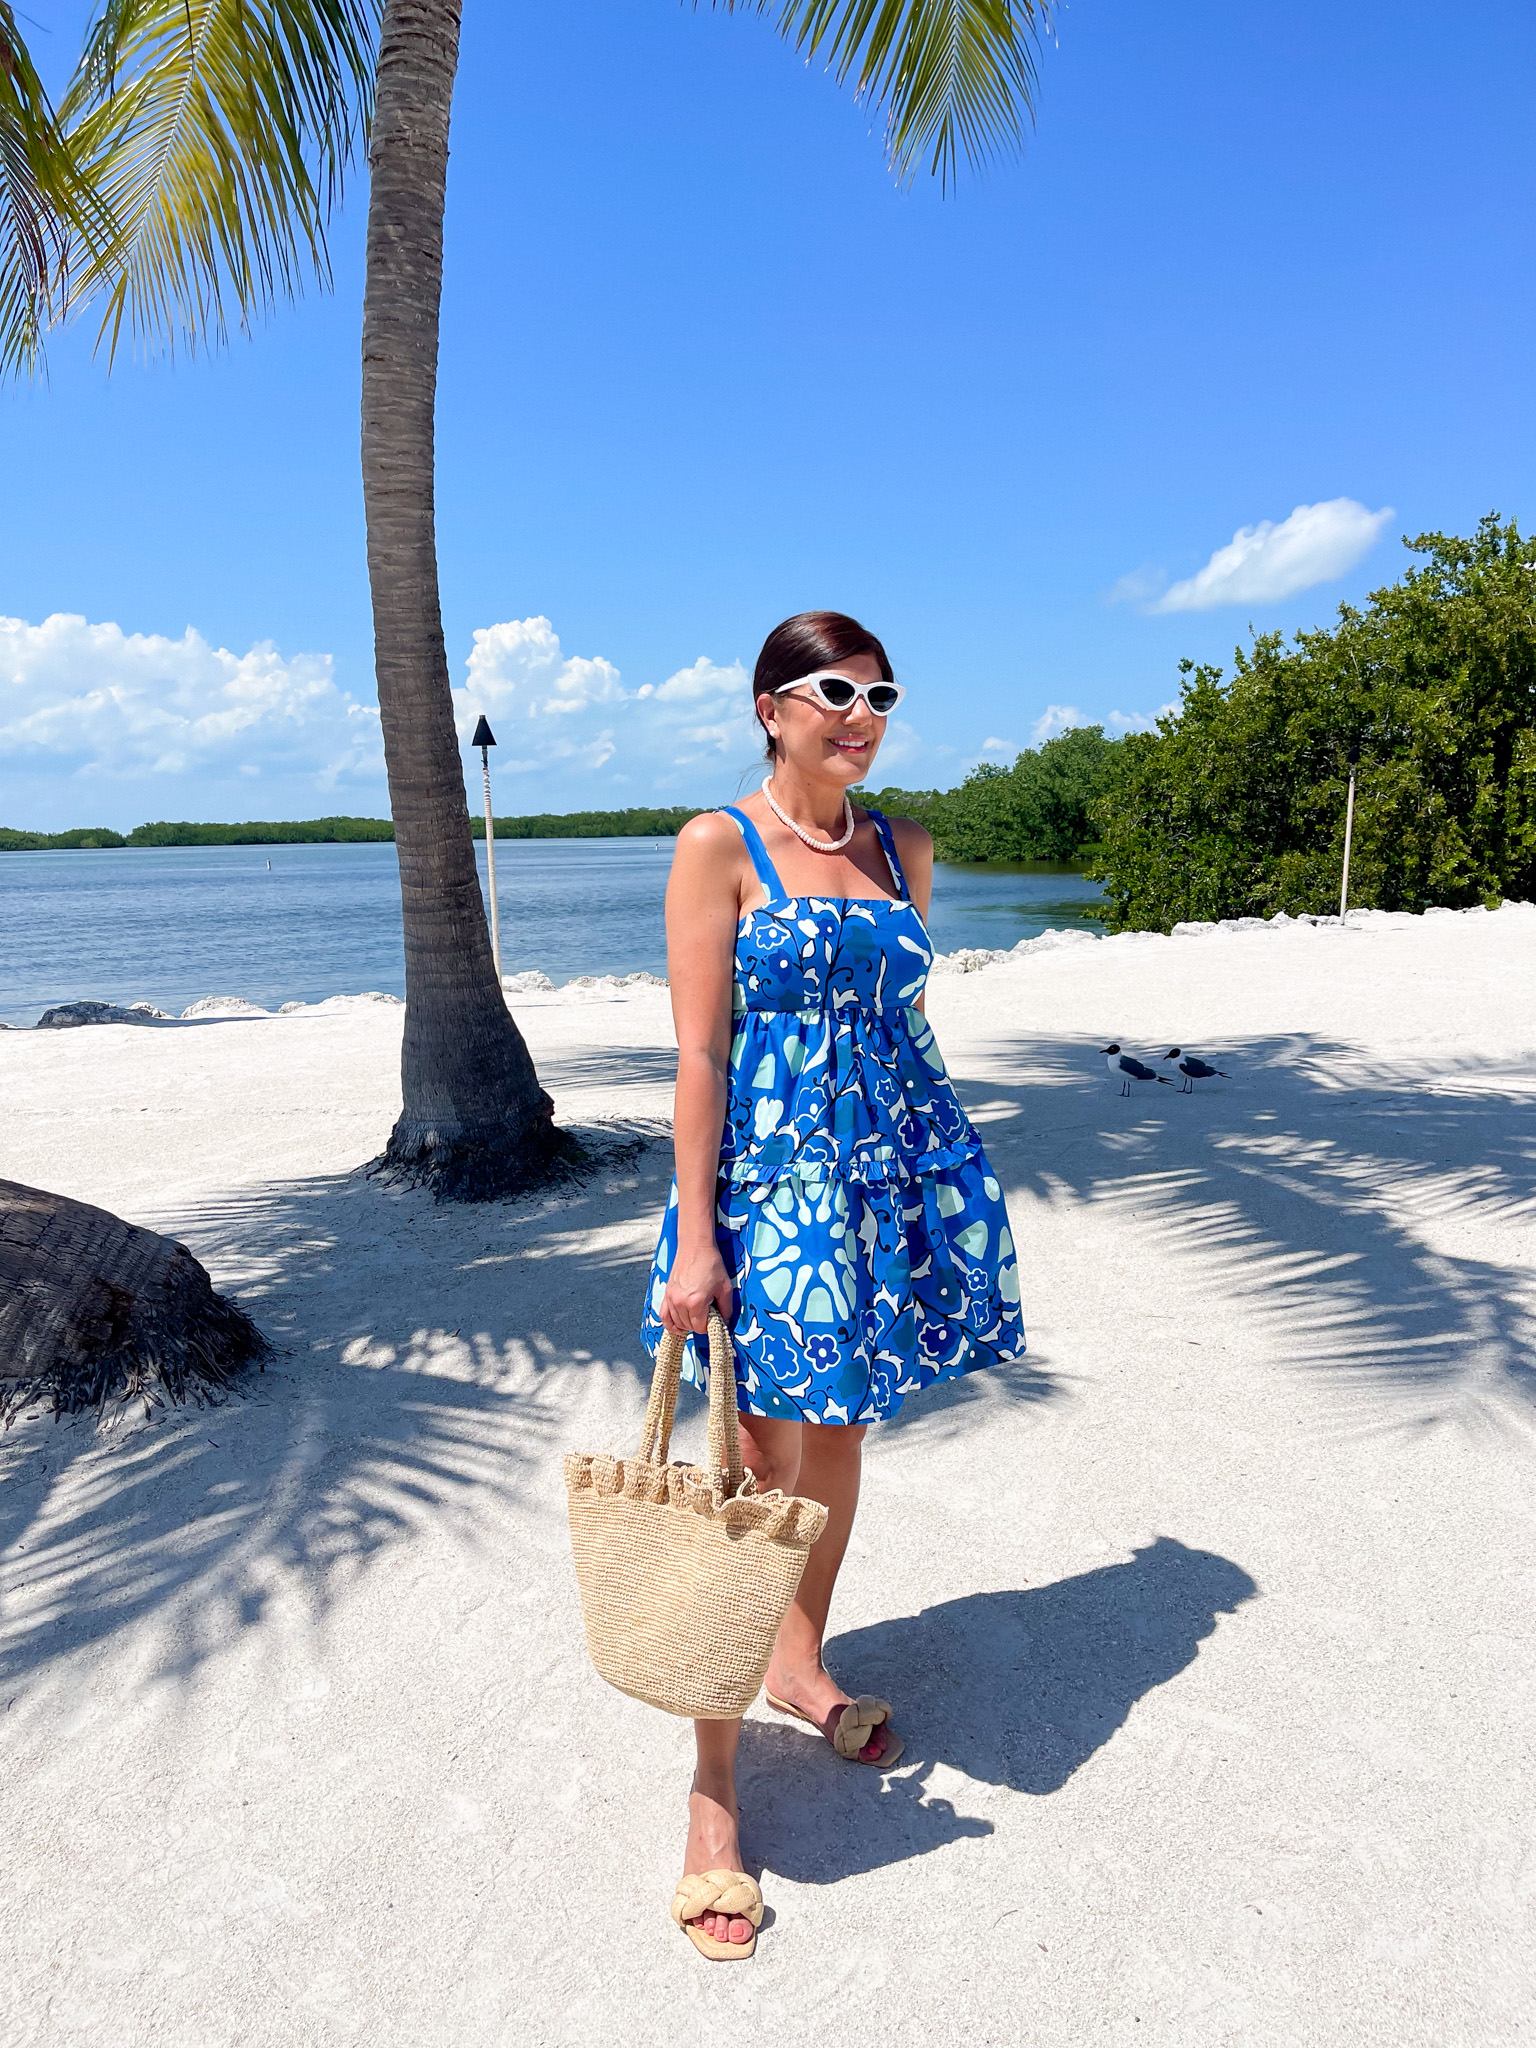 Desiree Leone of Beautifully Seaside shares stylish resortwear looks for under $50 that you can pack for your next vacation, including this Rhode floral mini dress at Target.